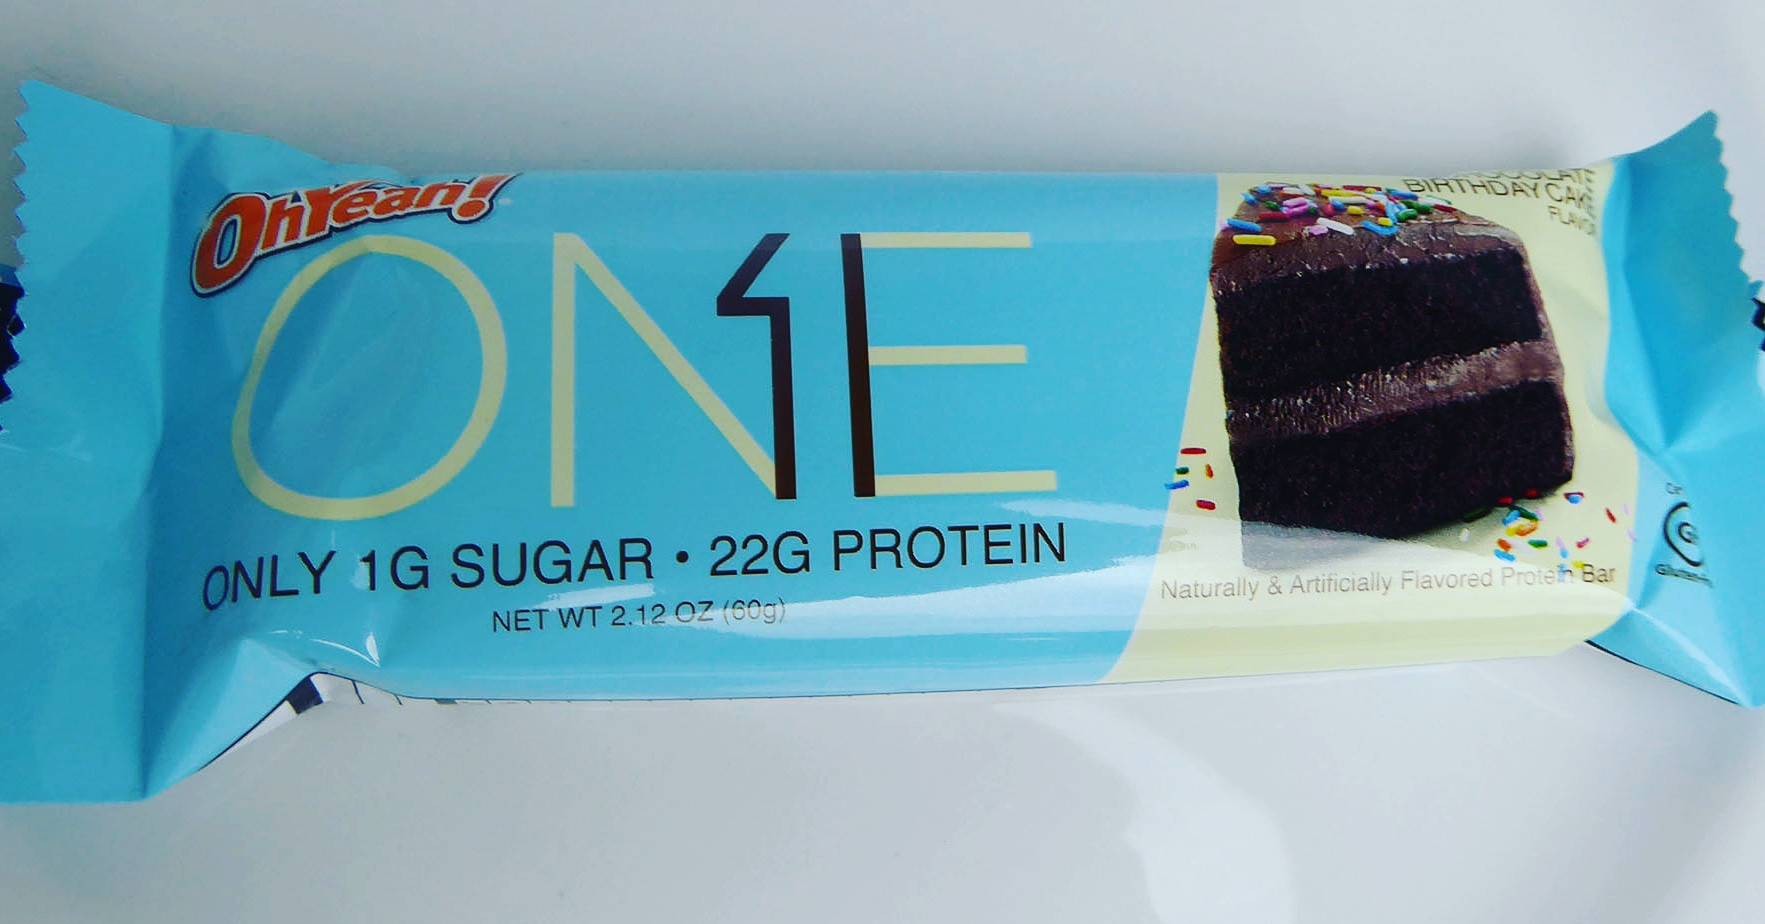 One Birthday Cake Protein Bar
 350kcal – 359kcal per 100g – Best Protein Bars Review